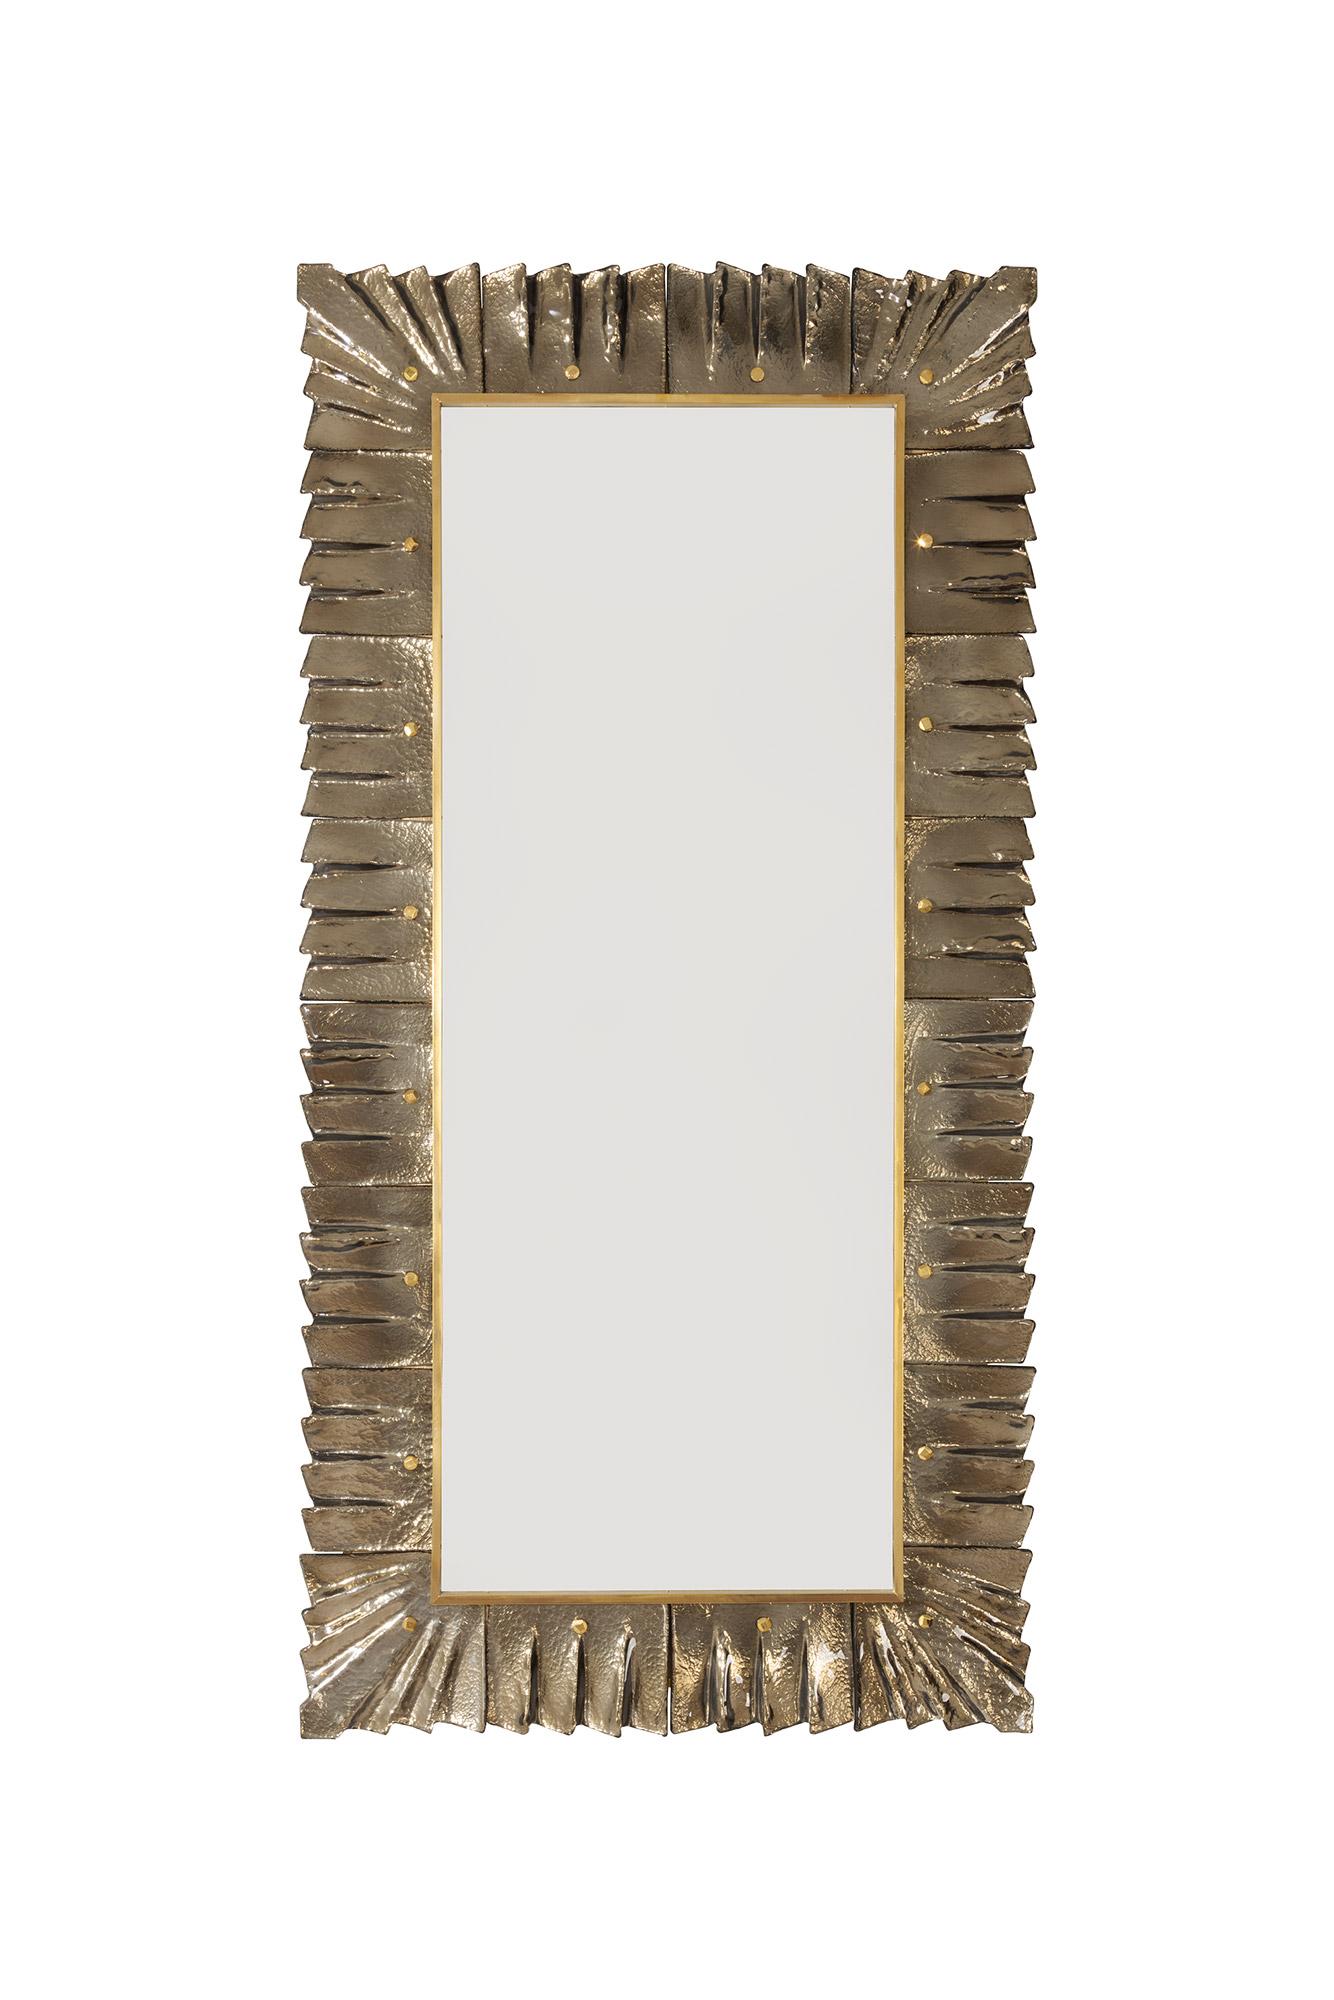 Pair of large Murano amber bronze glass framed mirrors, in stock.
Rectangular mirror plate surrounded with undulating glass tiles in amber bronze color held by brass cabochons. 
Handcrafted by a team of artisans in Venice, Italy. 
Can be easily hung